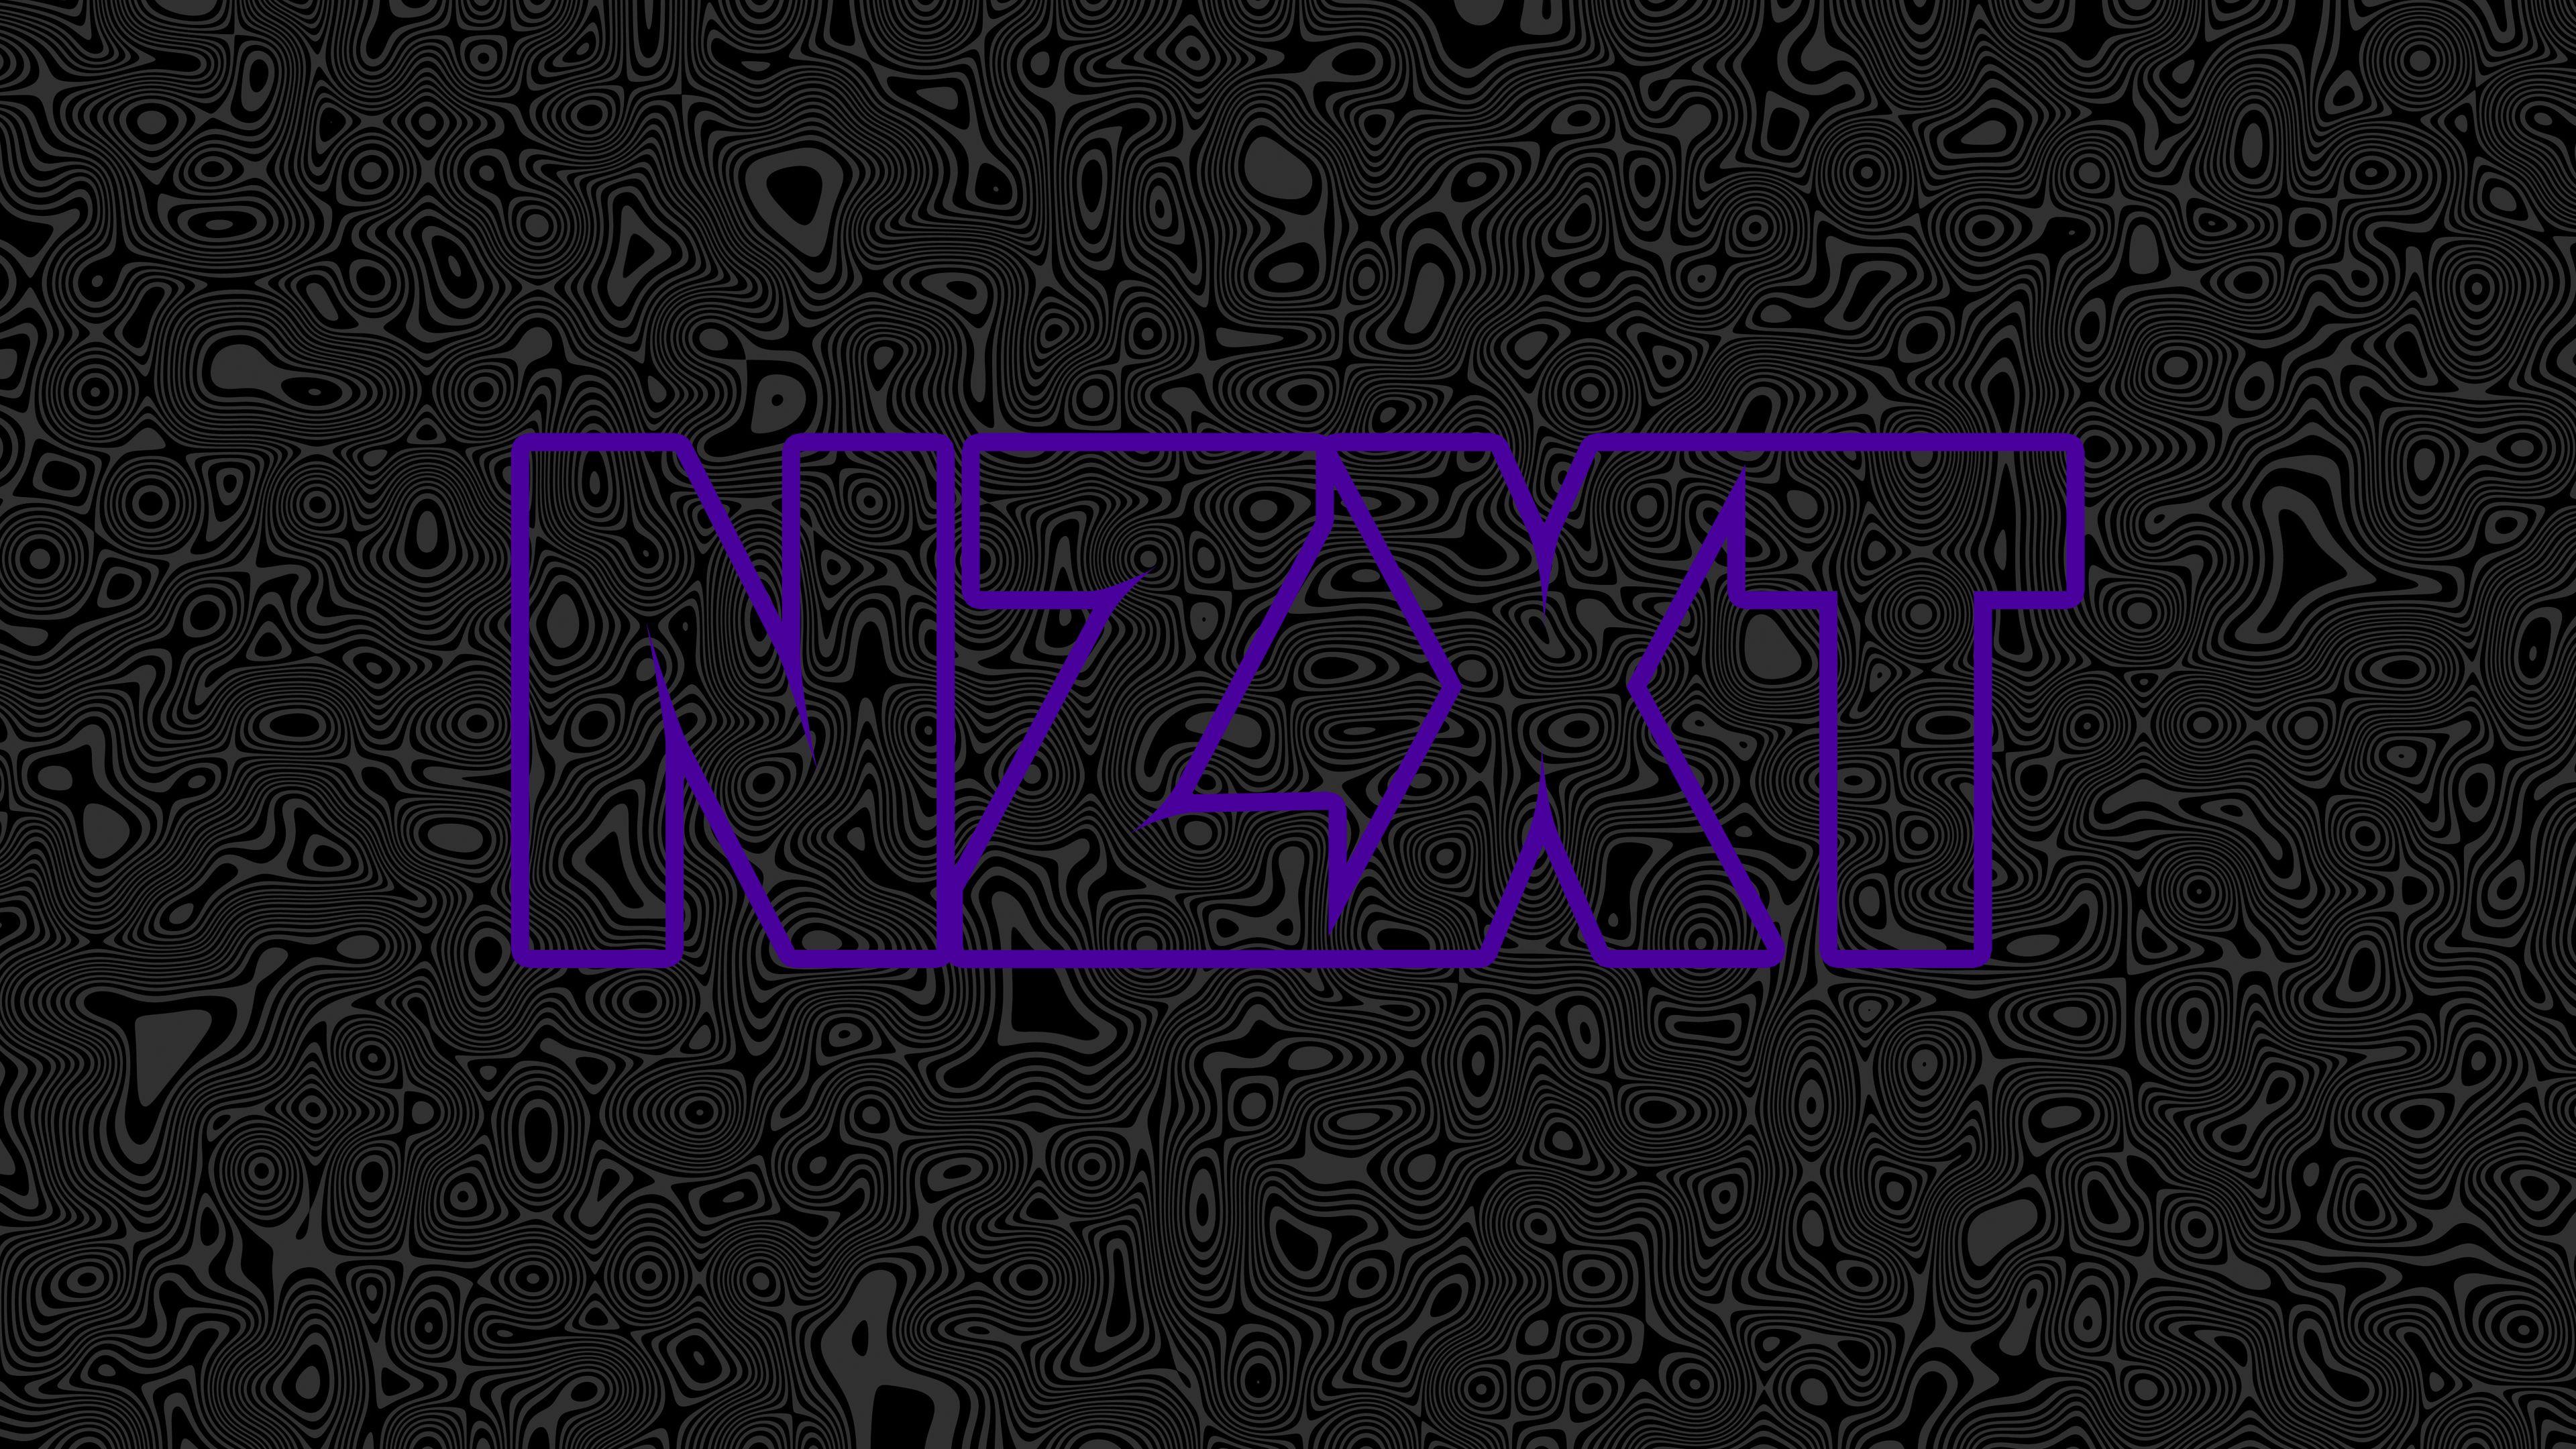 TΞXO on Twitter Did some more NZXT Wallpapers Hope you and the  community loves them Did 9 wallpapers in total today Link to all  wallpapers all UHD 4K gt httpstcoLhqncX8SQH NZXTde NZXTES 